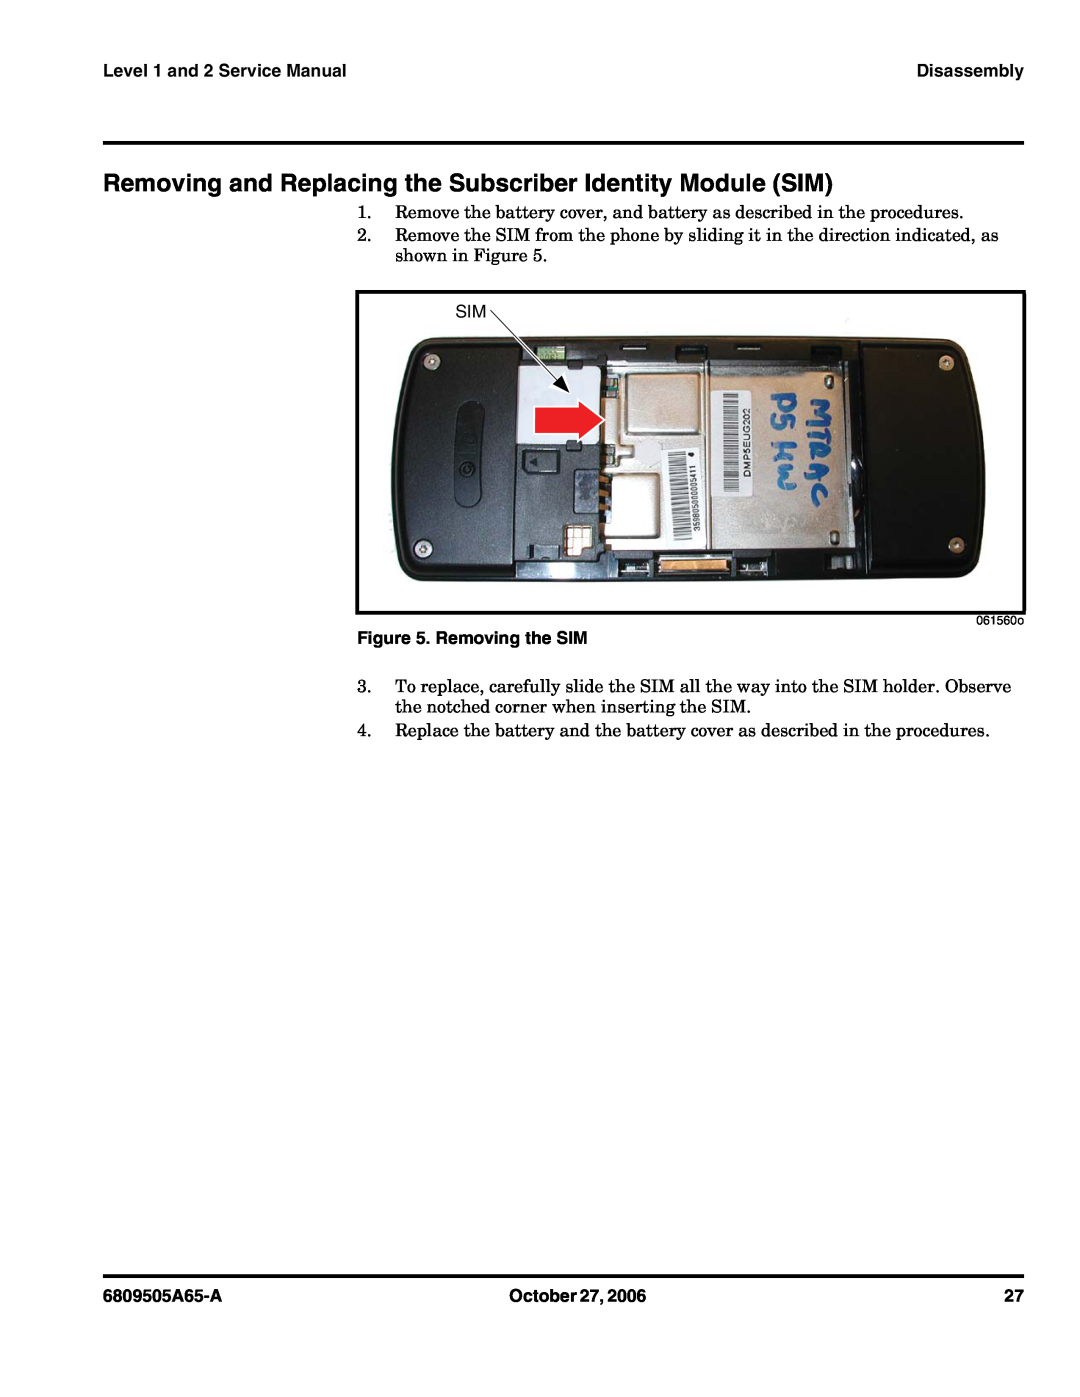 Motorola F3 Removing and Replacing the Subscriber Identity Module SIM, Removing the SIM, Level 1 and 2 Service Manual 